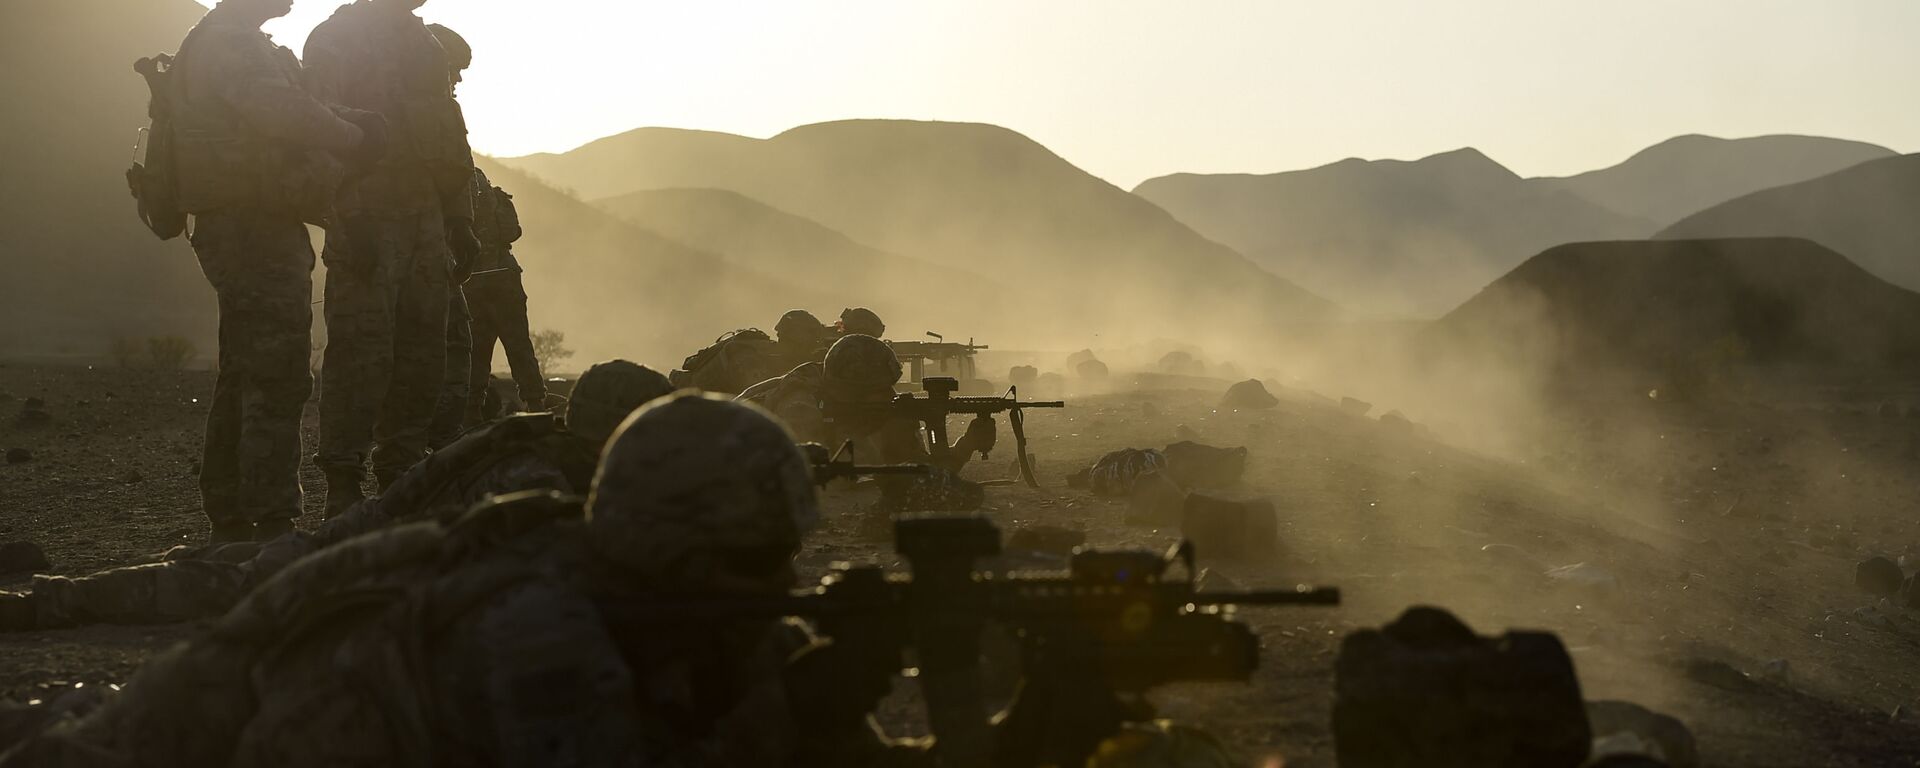 U.S. Army Soldiers with 3rd Platoon, Battle Company, 1-32 Infantry, 1st Brigade Combat Team, 10th Mountain Division, assigned to Combined Joint Task Force Horn of Africa's East African Response Force, conduct a series of team stress shoots and support by fire exercises in Djibouti, Nov. 22, 2017 - Sputnik International, 1920, 30.04.2021